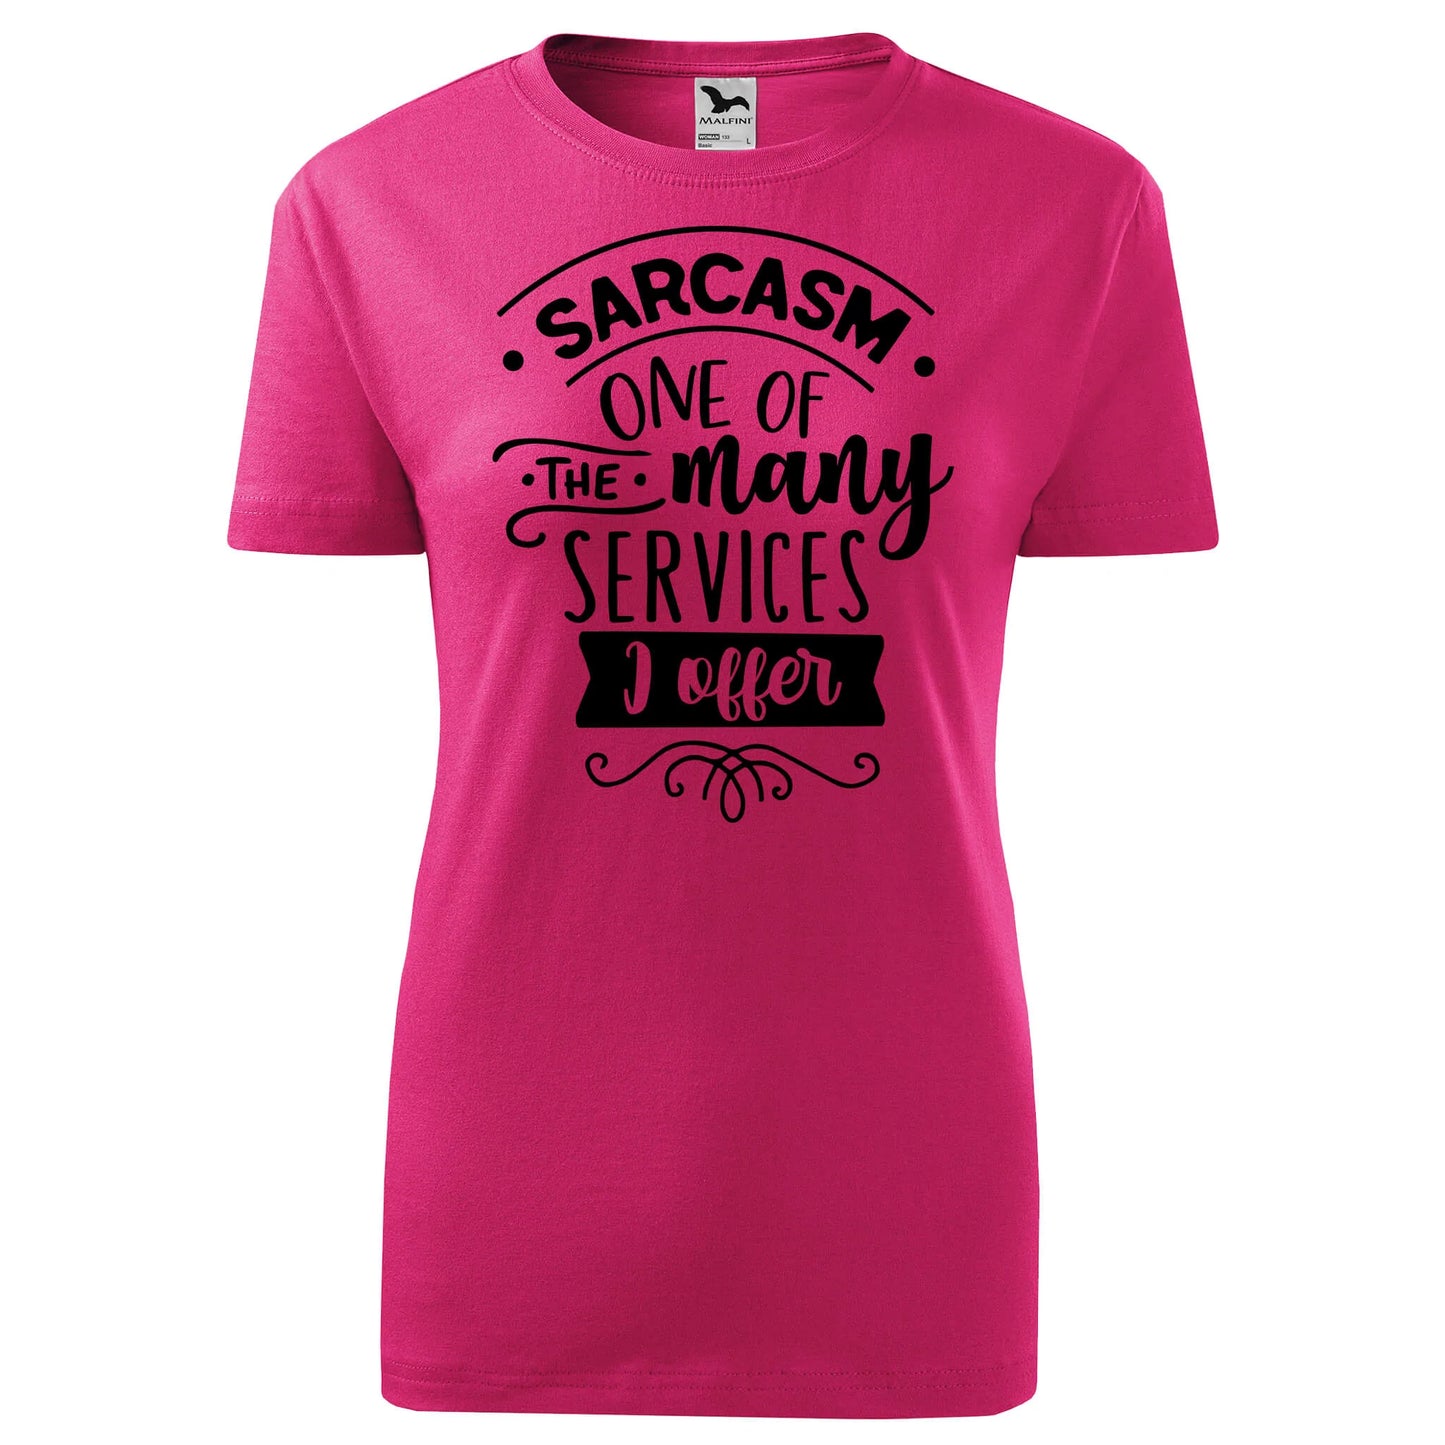 Sarcasm one of the services t-shirt - rvdesignprint